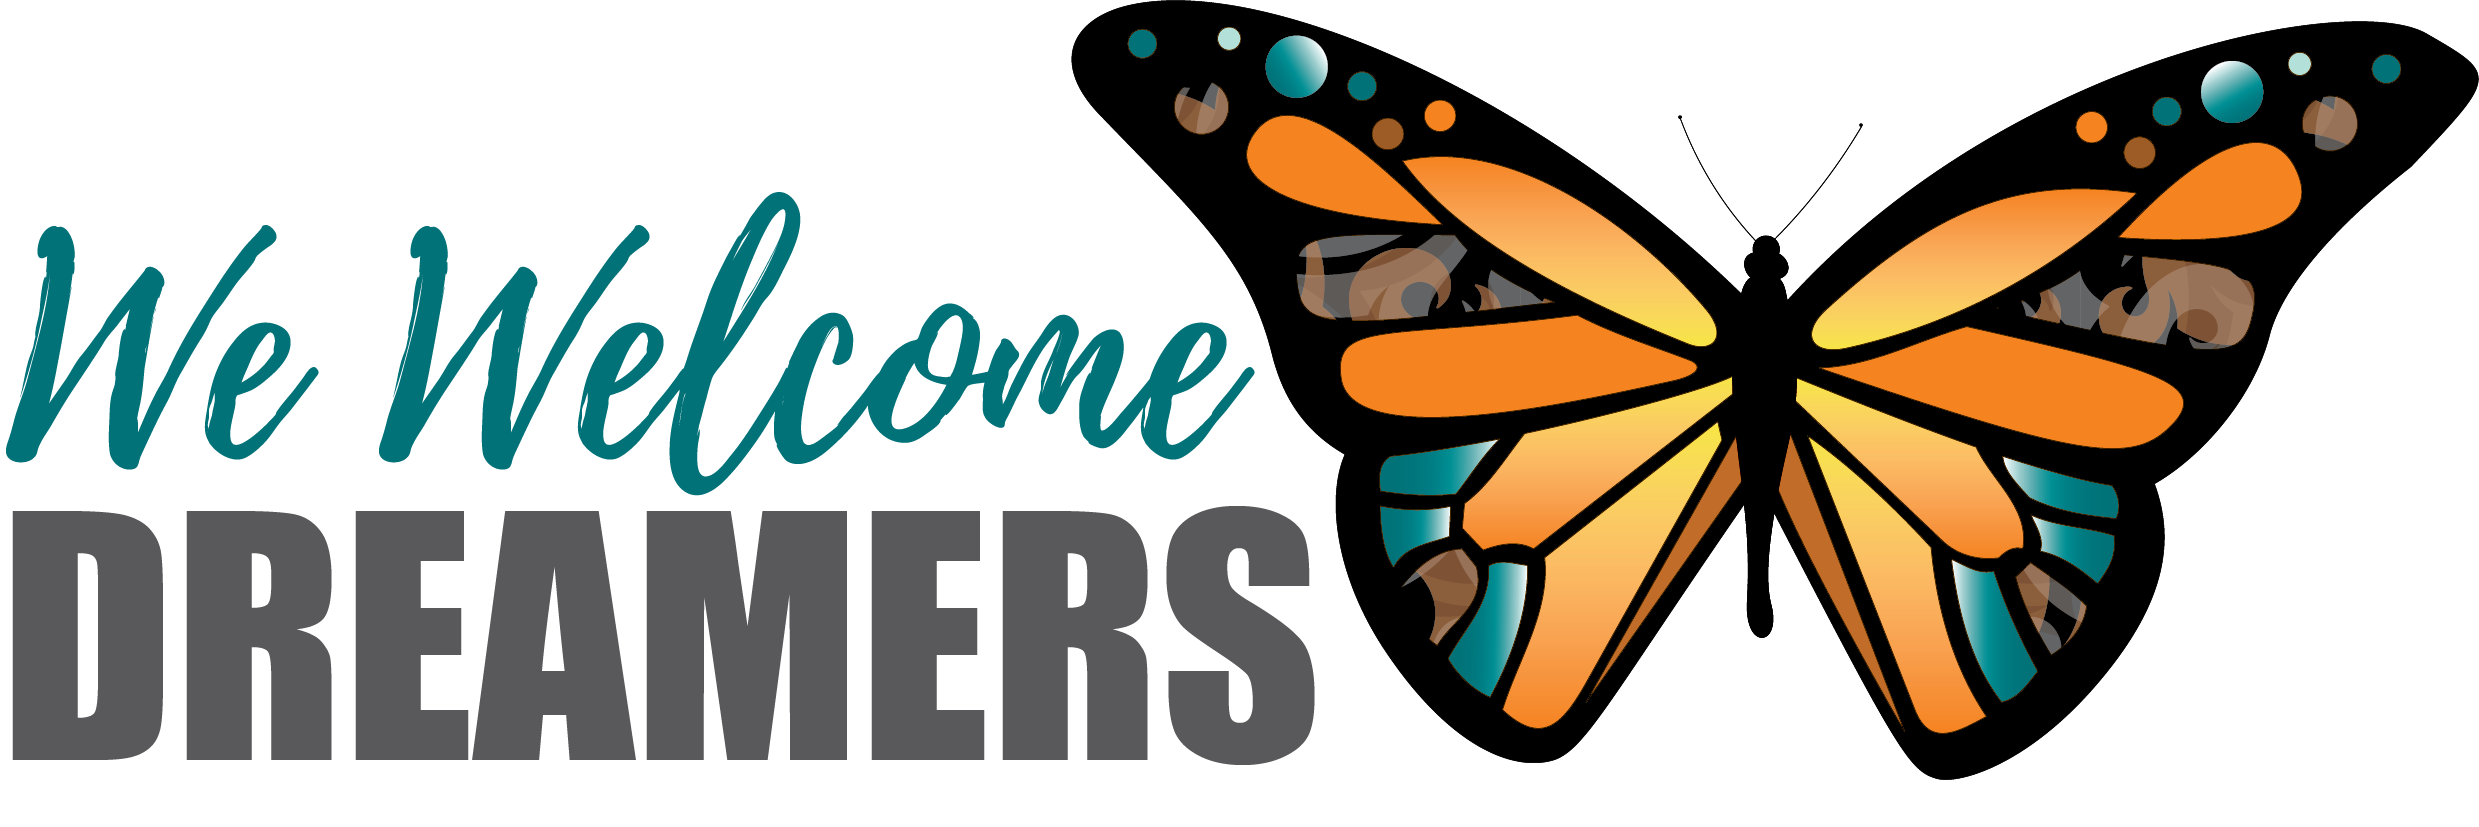 We welcome Dreamers